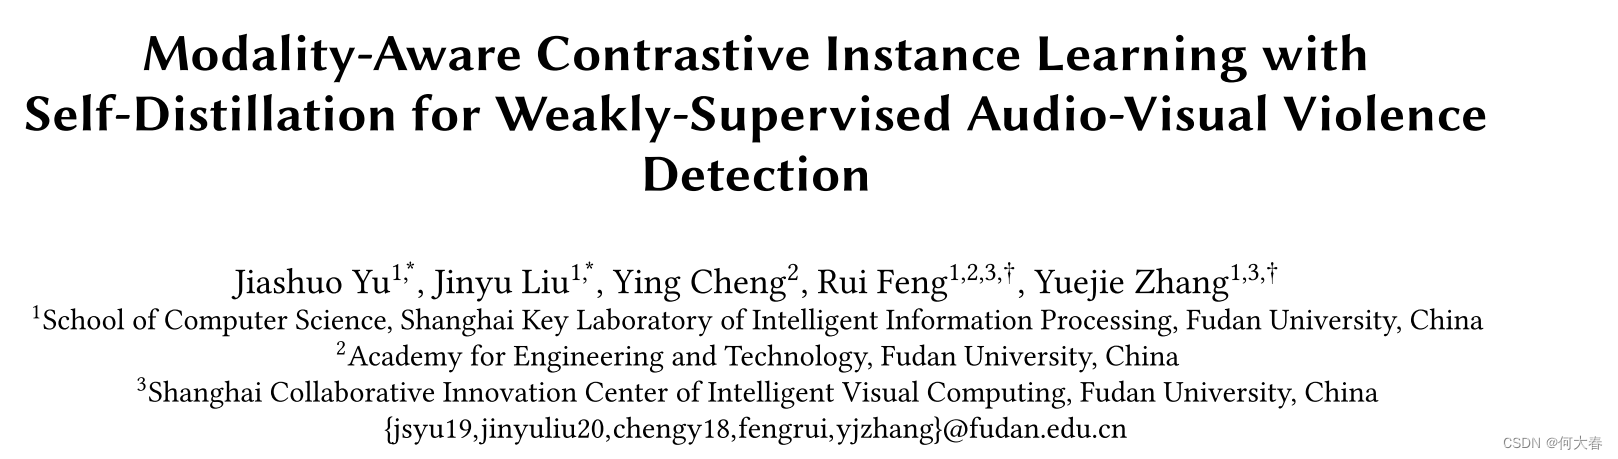 Modality-Aware Contrastive Instance Learning with Self-Distillation ... 论文阅读